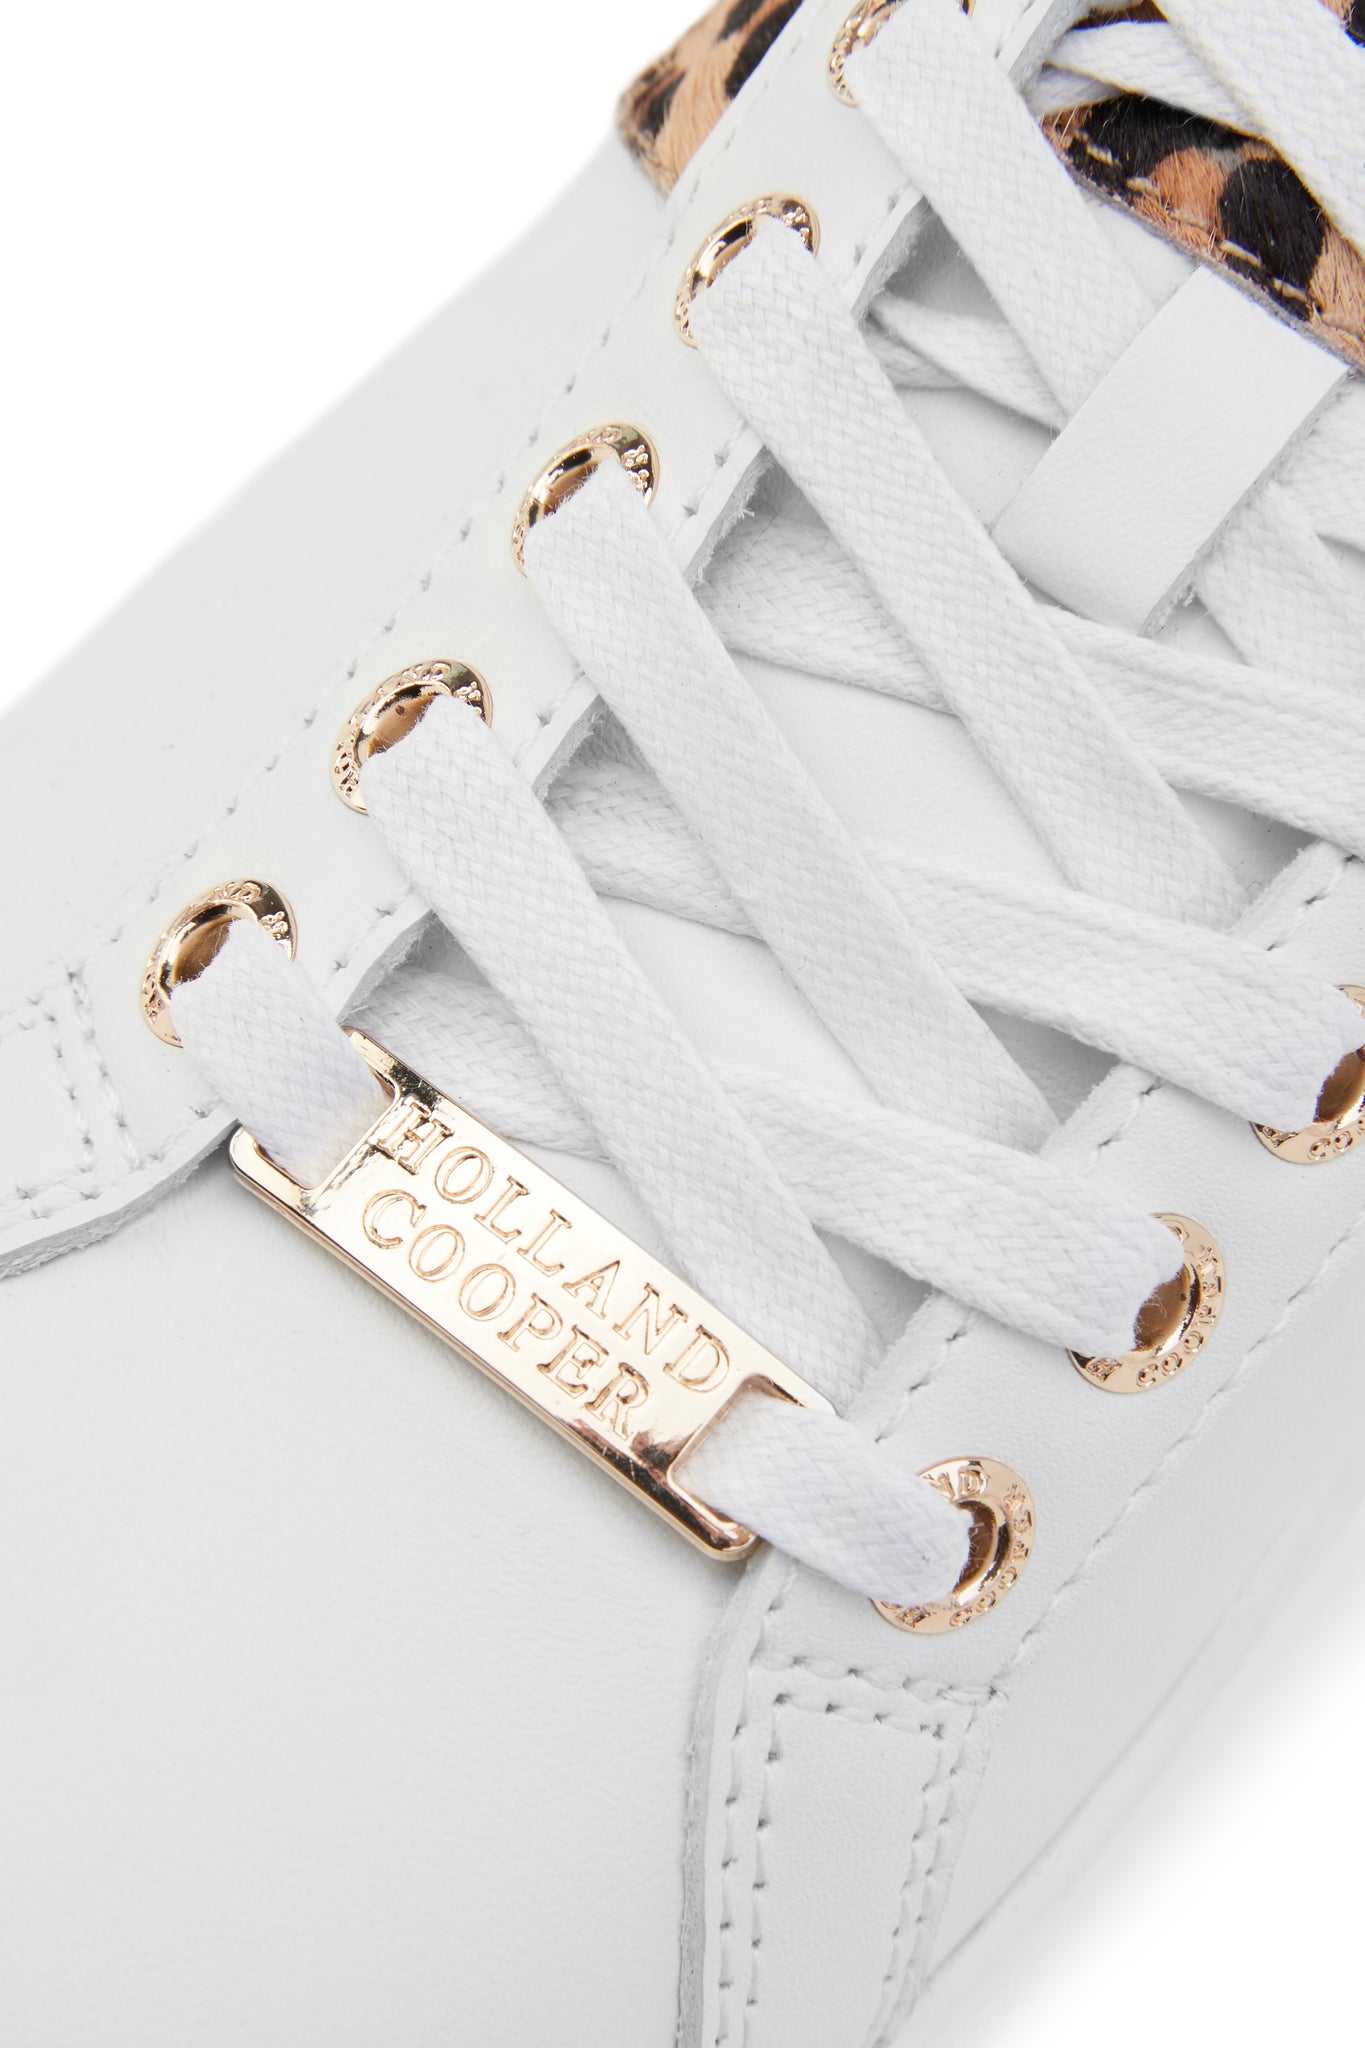 Close up of gold hardware and white laces